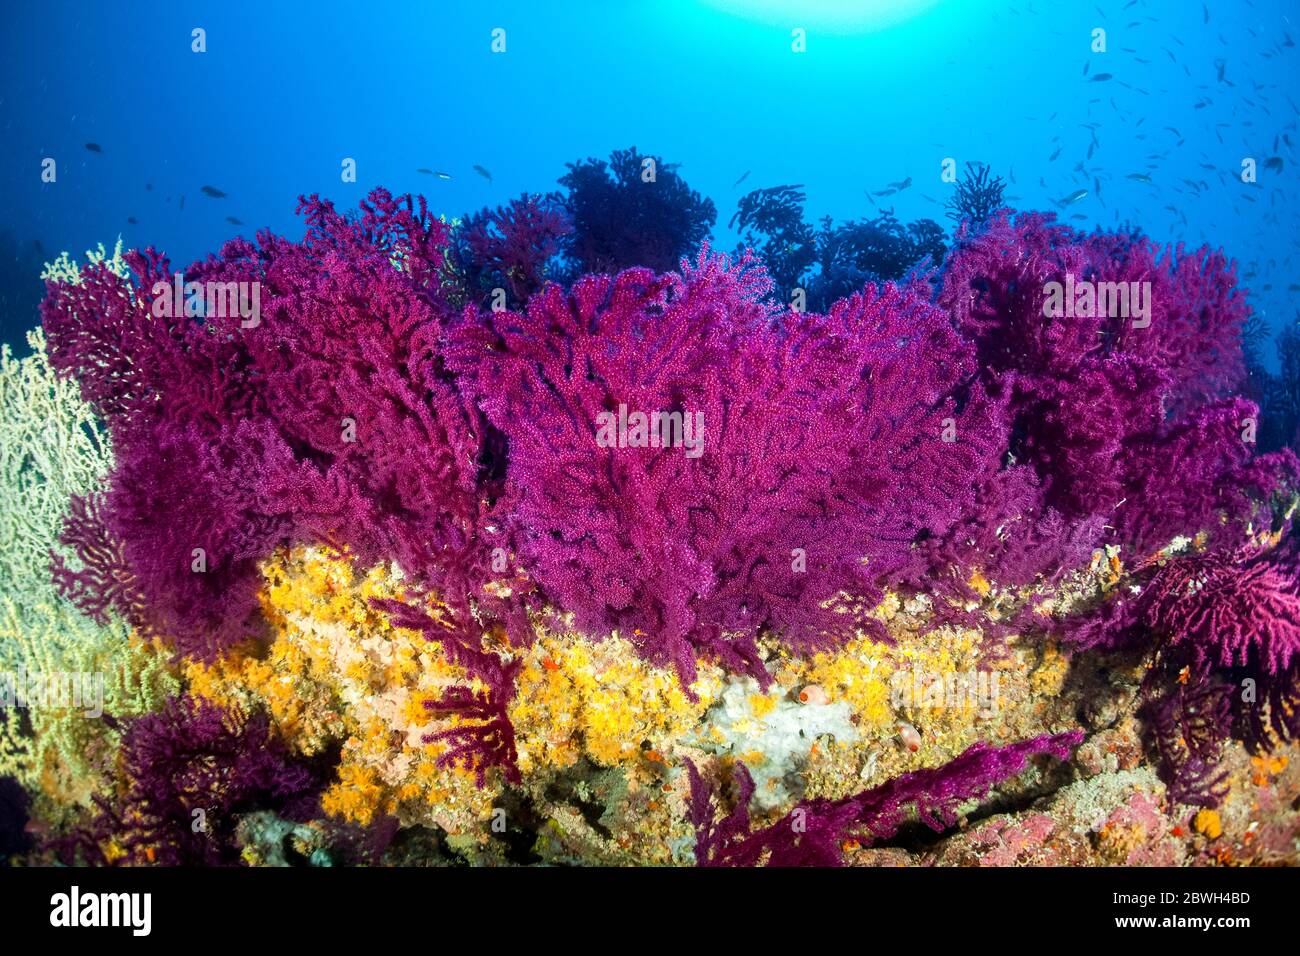 violescent sea whip, or red sea fan, Paramuricea clavata, and yellow cluster anemones, Parazoanthus axinellae, Wall of Bisevo, Vis Island, Croatia, Ad Stock Photo